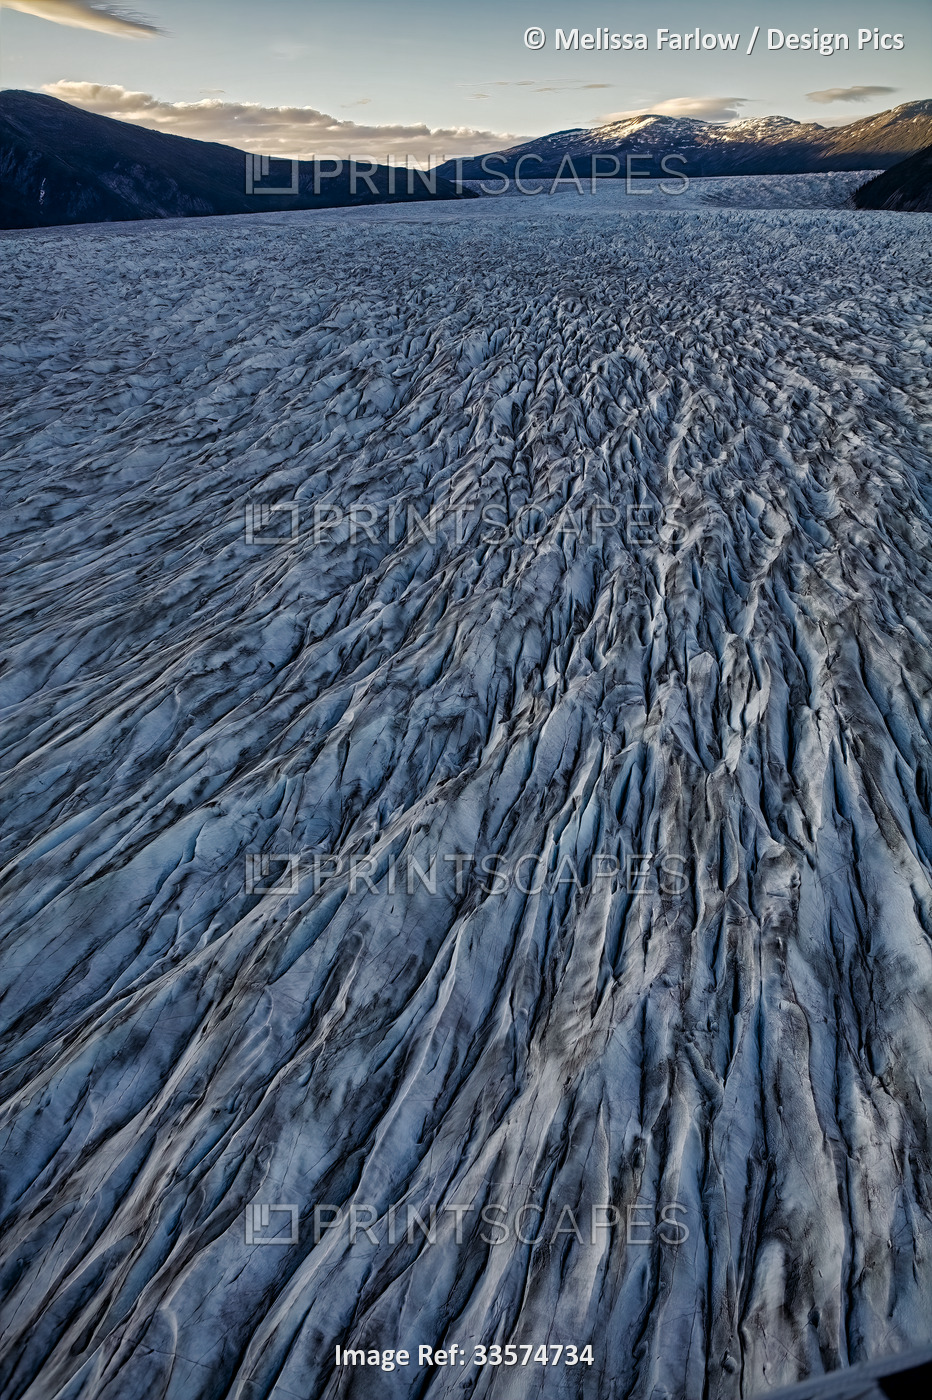 Taku Glacier in the Juneau Icefield is the deepest and thickest alpine, ...